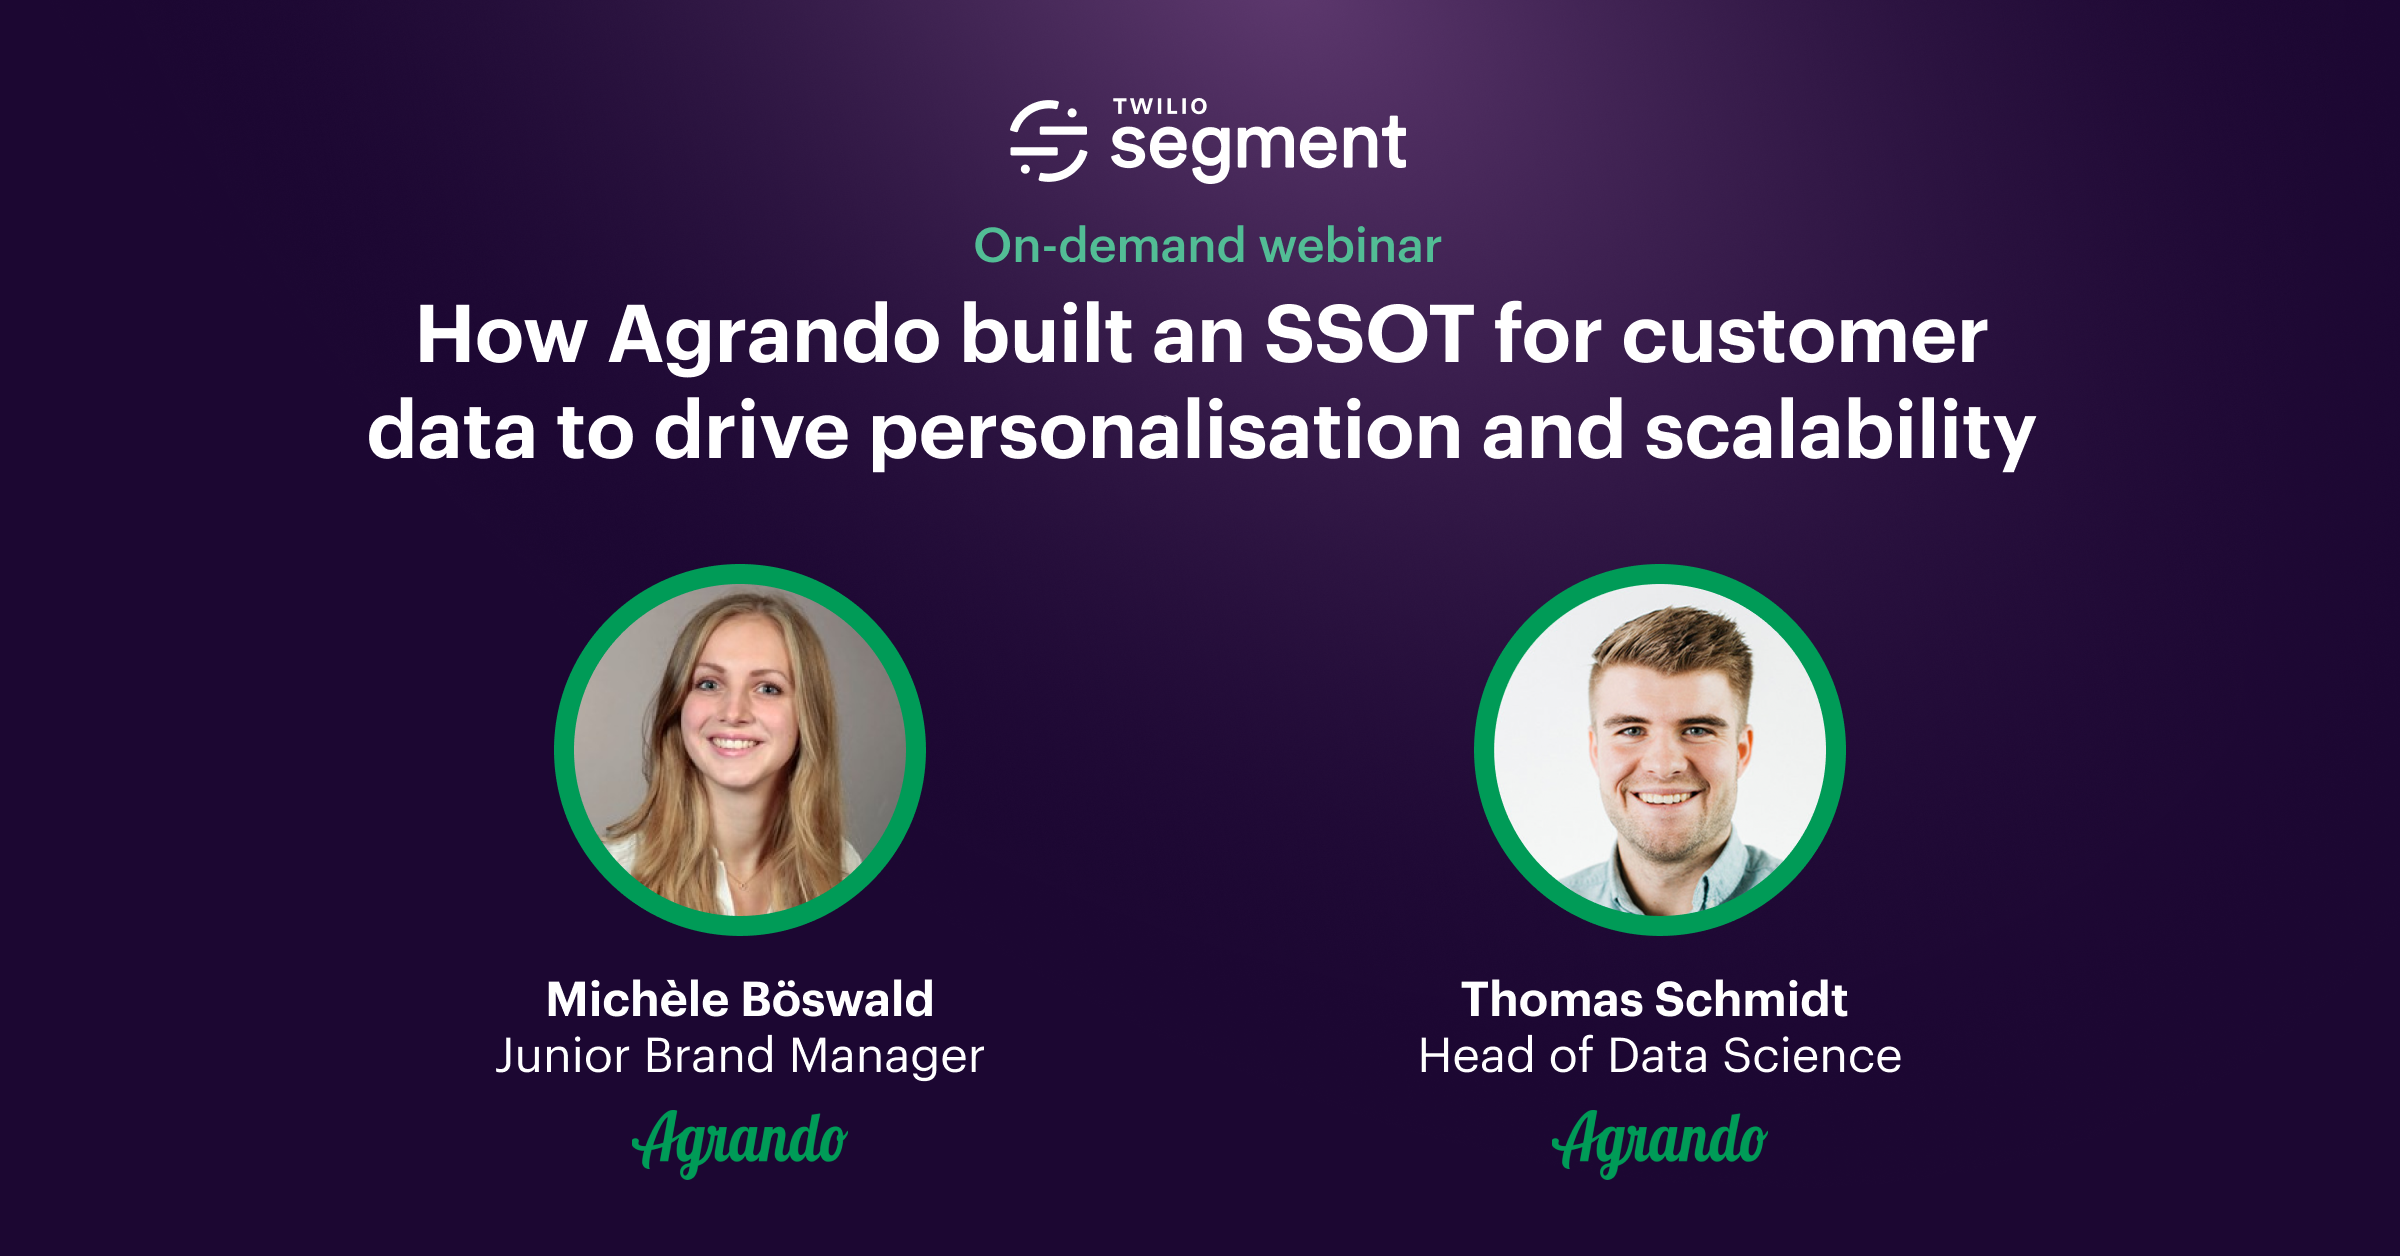 How Agrando built an SSOT for customer data to drive personalisation and scalability